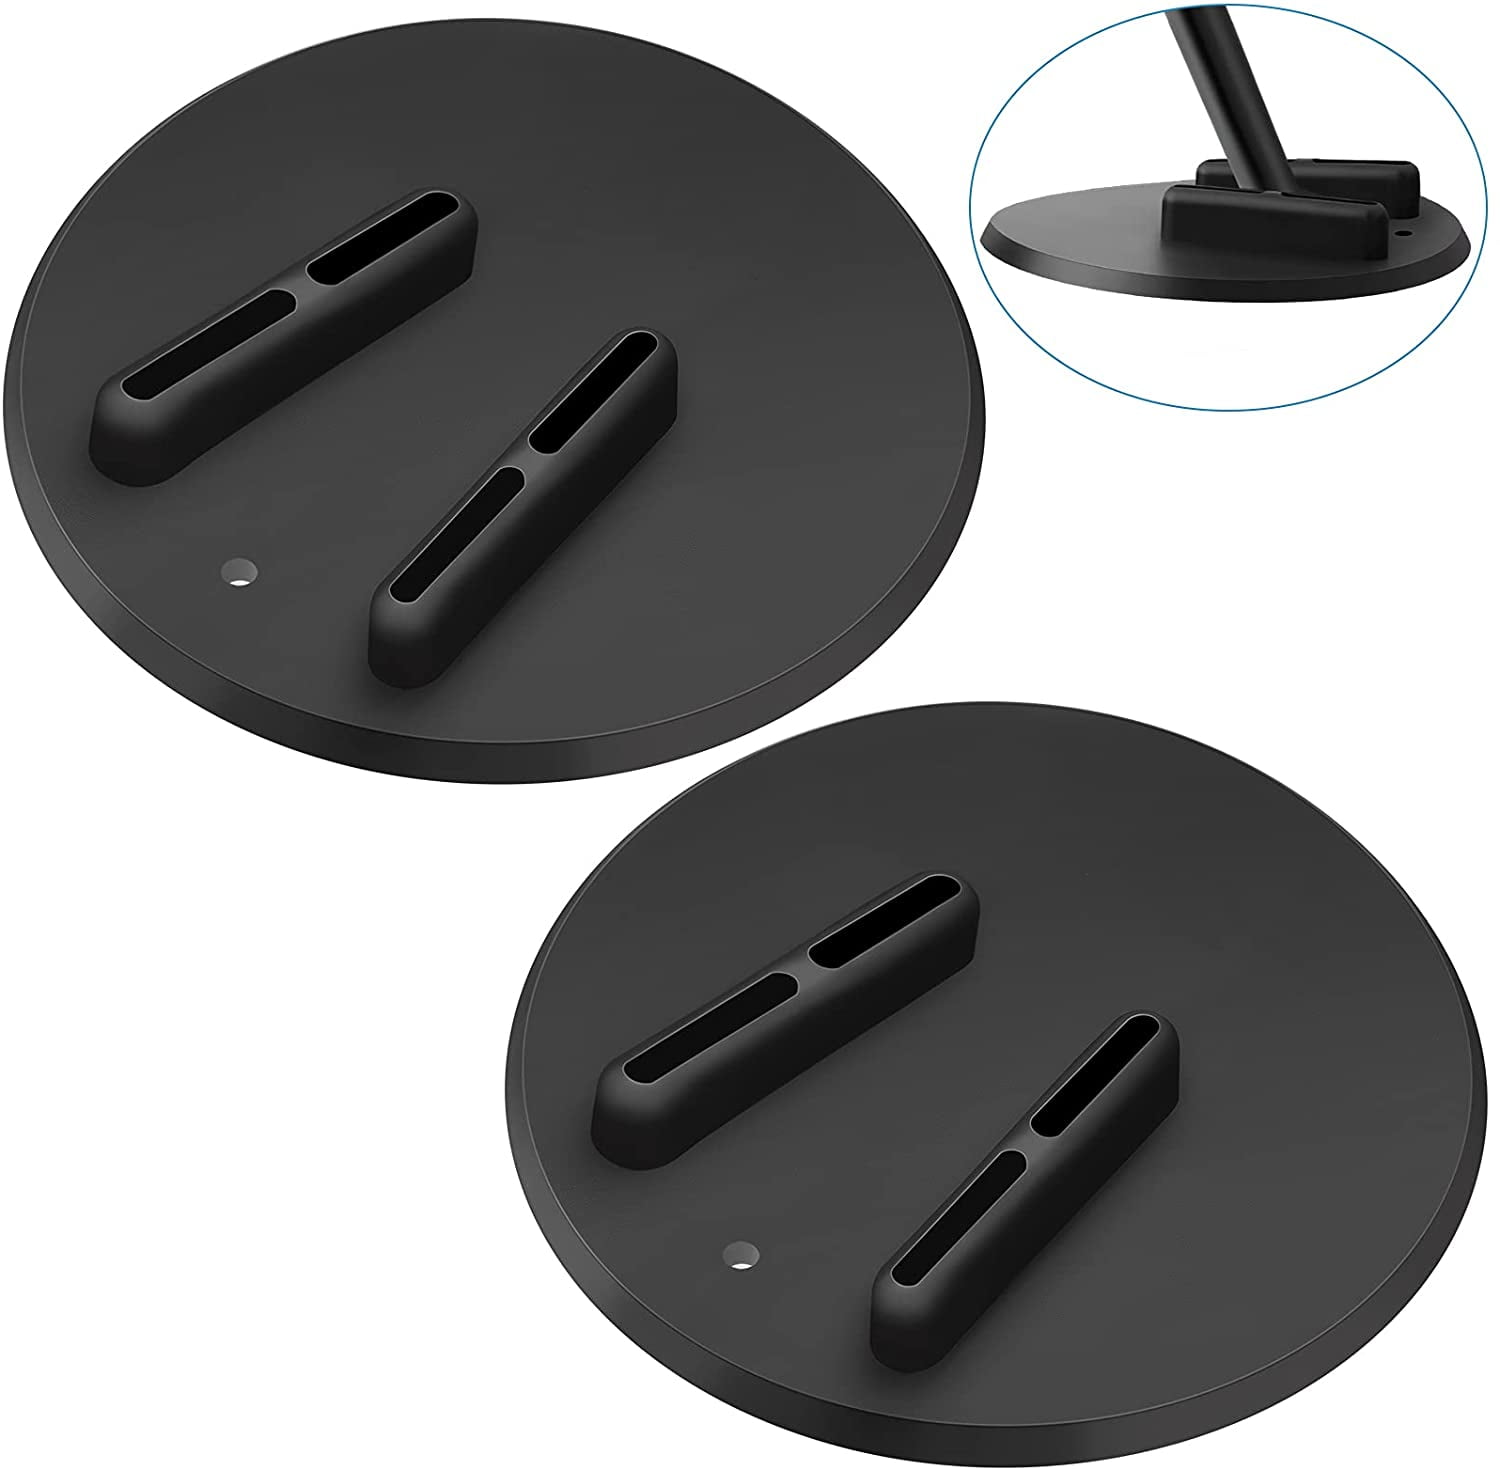 2x Motorcycle Support Stand Side Kickstand Pad Anti-Slip Plate PP Plastic Black for Gravel Road Soft Ground Outdoor Grass Parking 